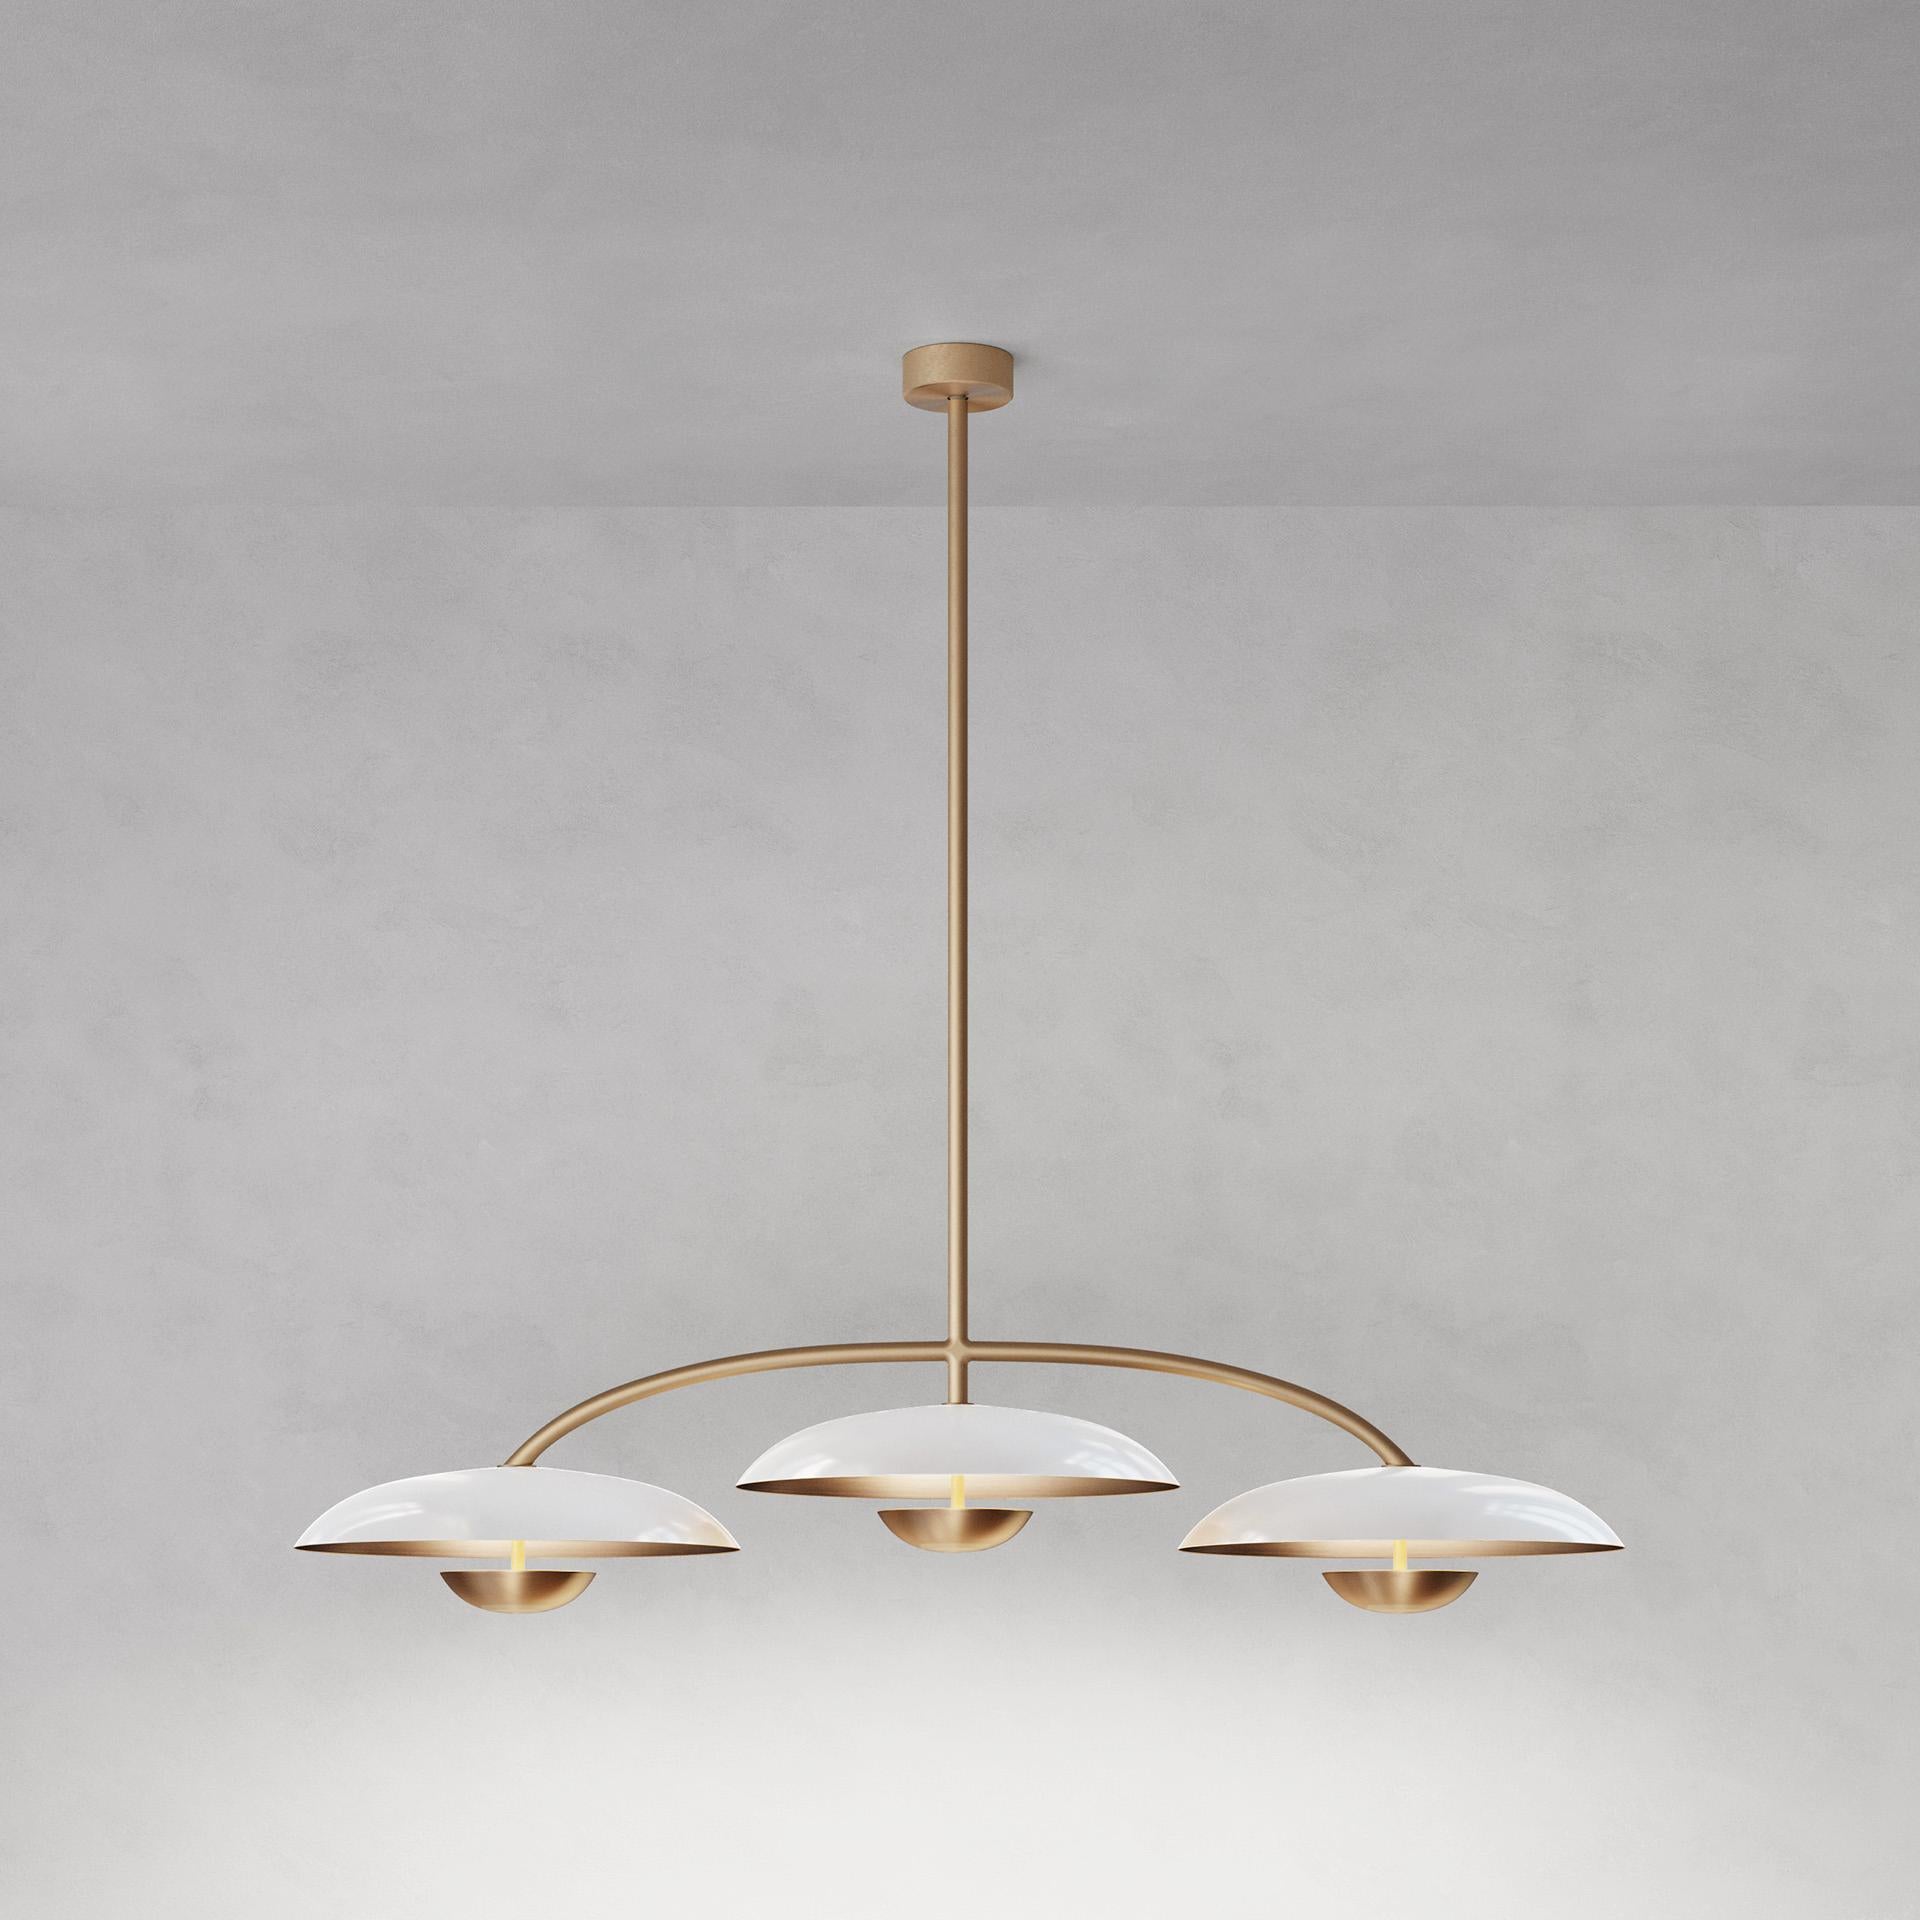 Orbit Trio Purion Ceiling Light by Atelier001
Dimensions: D40 x W120 x H116 cm
Materials: Shade Gloss or matt white lacquered brass
Framework Satin brass
Also Available: In different finishes.

All our lamps can be wired according to each country.